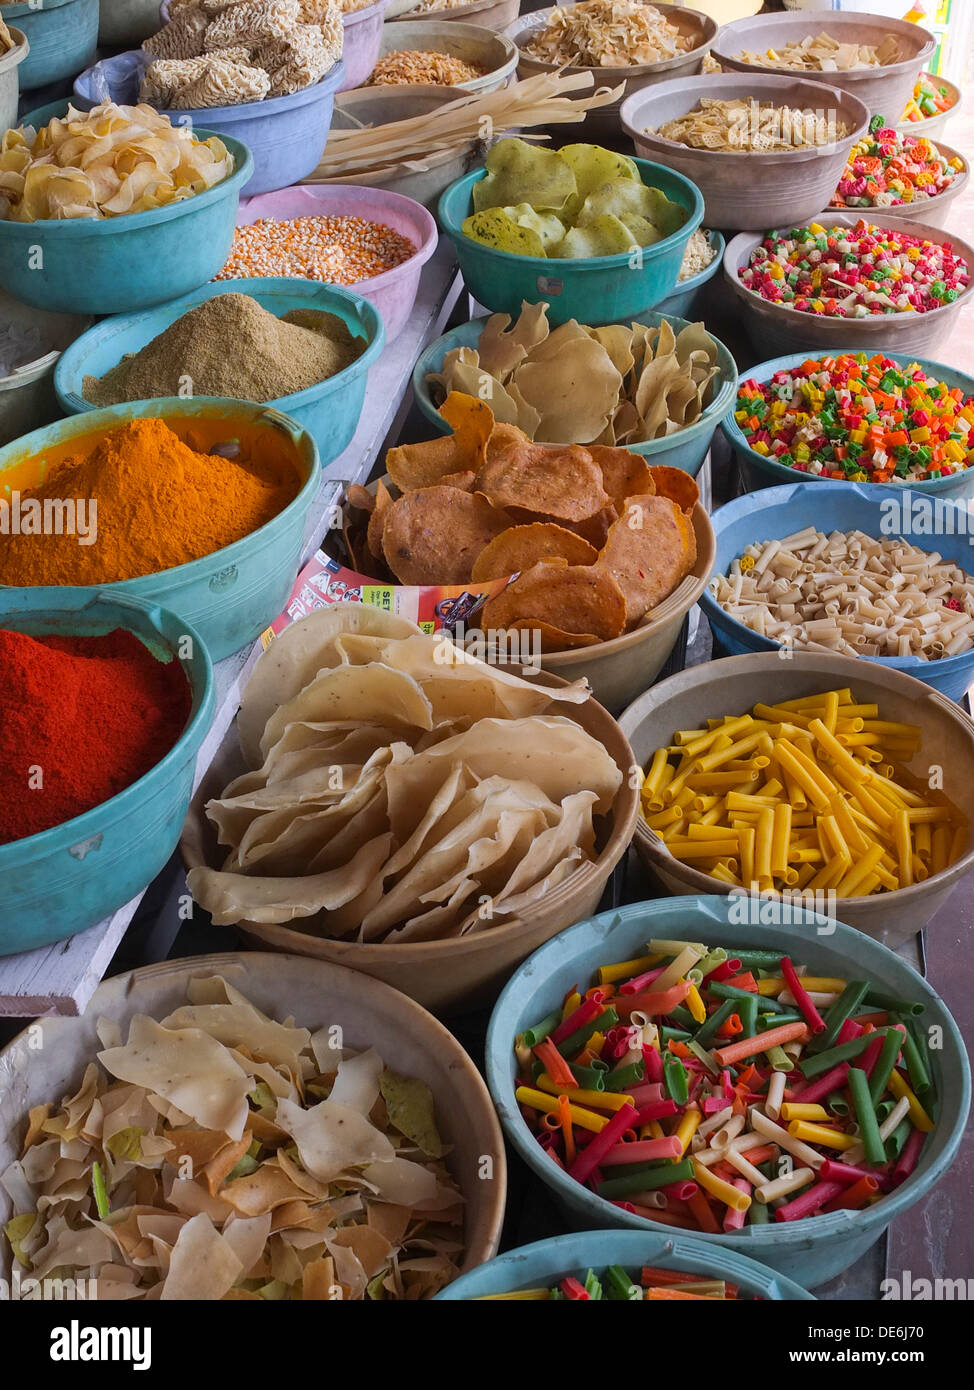 India, Rajasthan, Jaipur, dried foods and spices Stock Photo